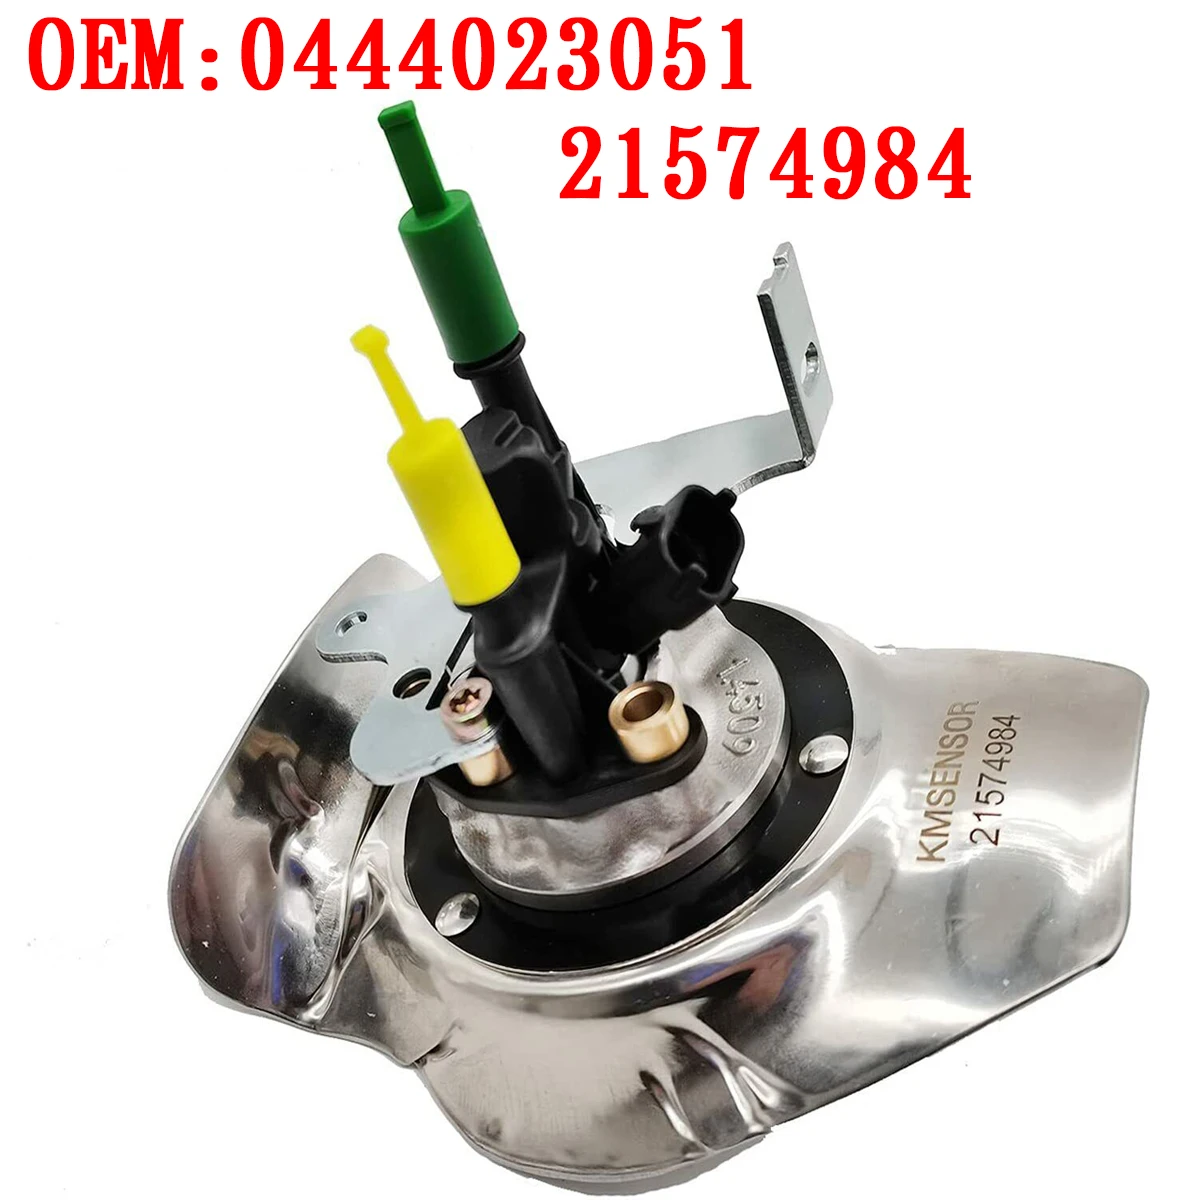 

High quality new urea injection dose module for Bosch 2.0 Volvo FH4 16 FM FMX Scania 0444023051 0444023053 0444023068